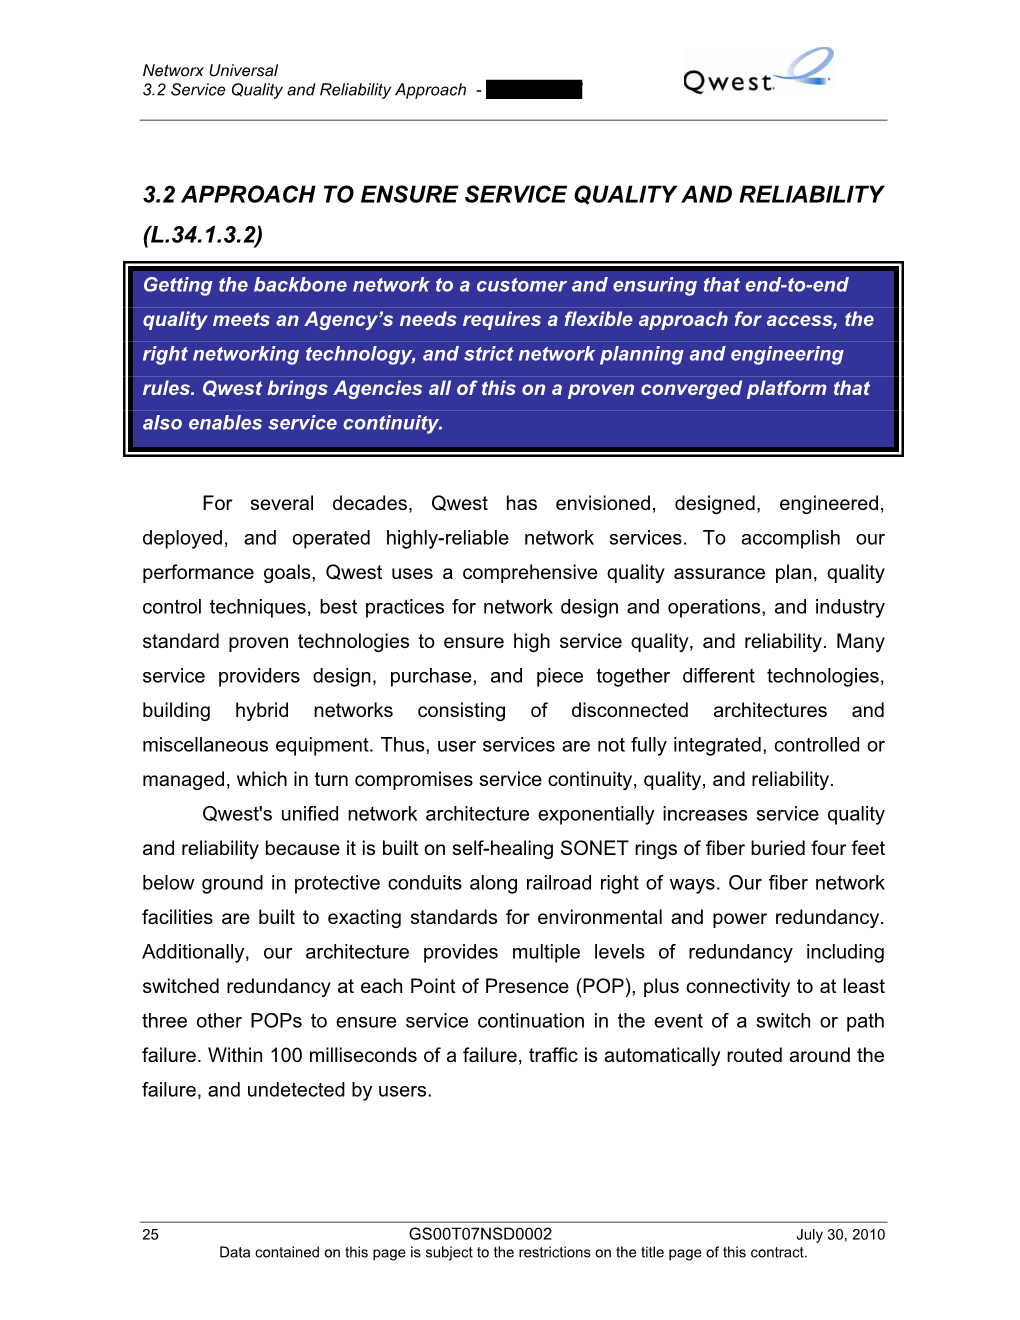 3.2 Approach to Ensure Service Quality and Reliability (L.34.1.3.2)